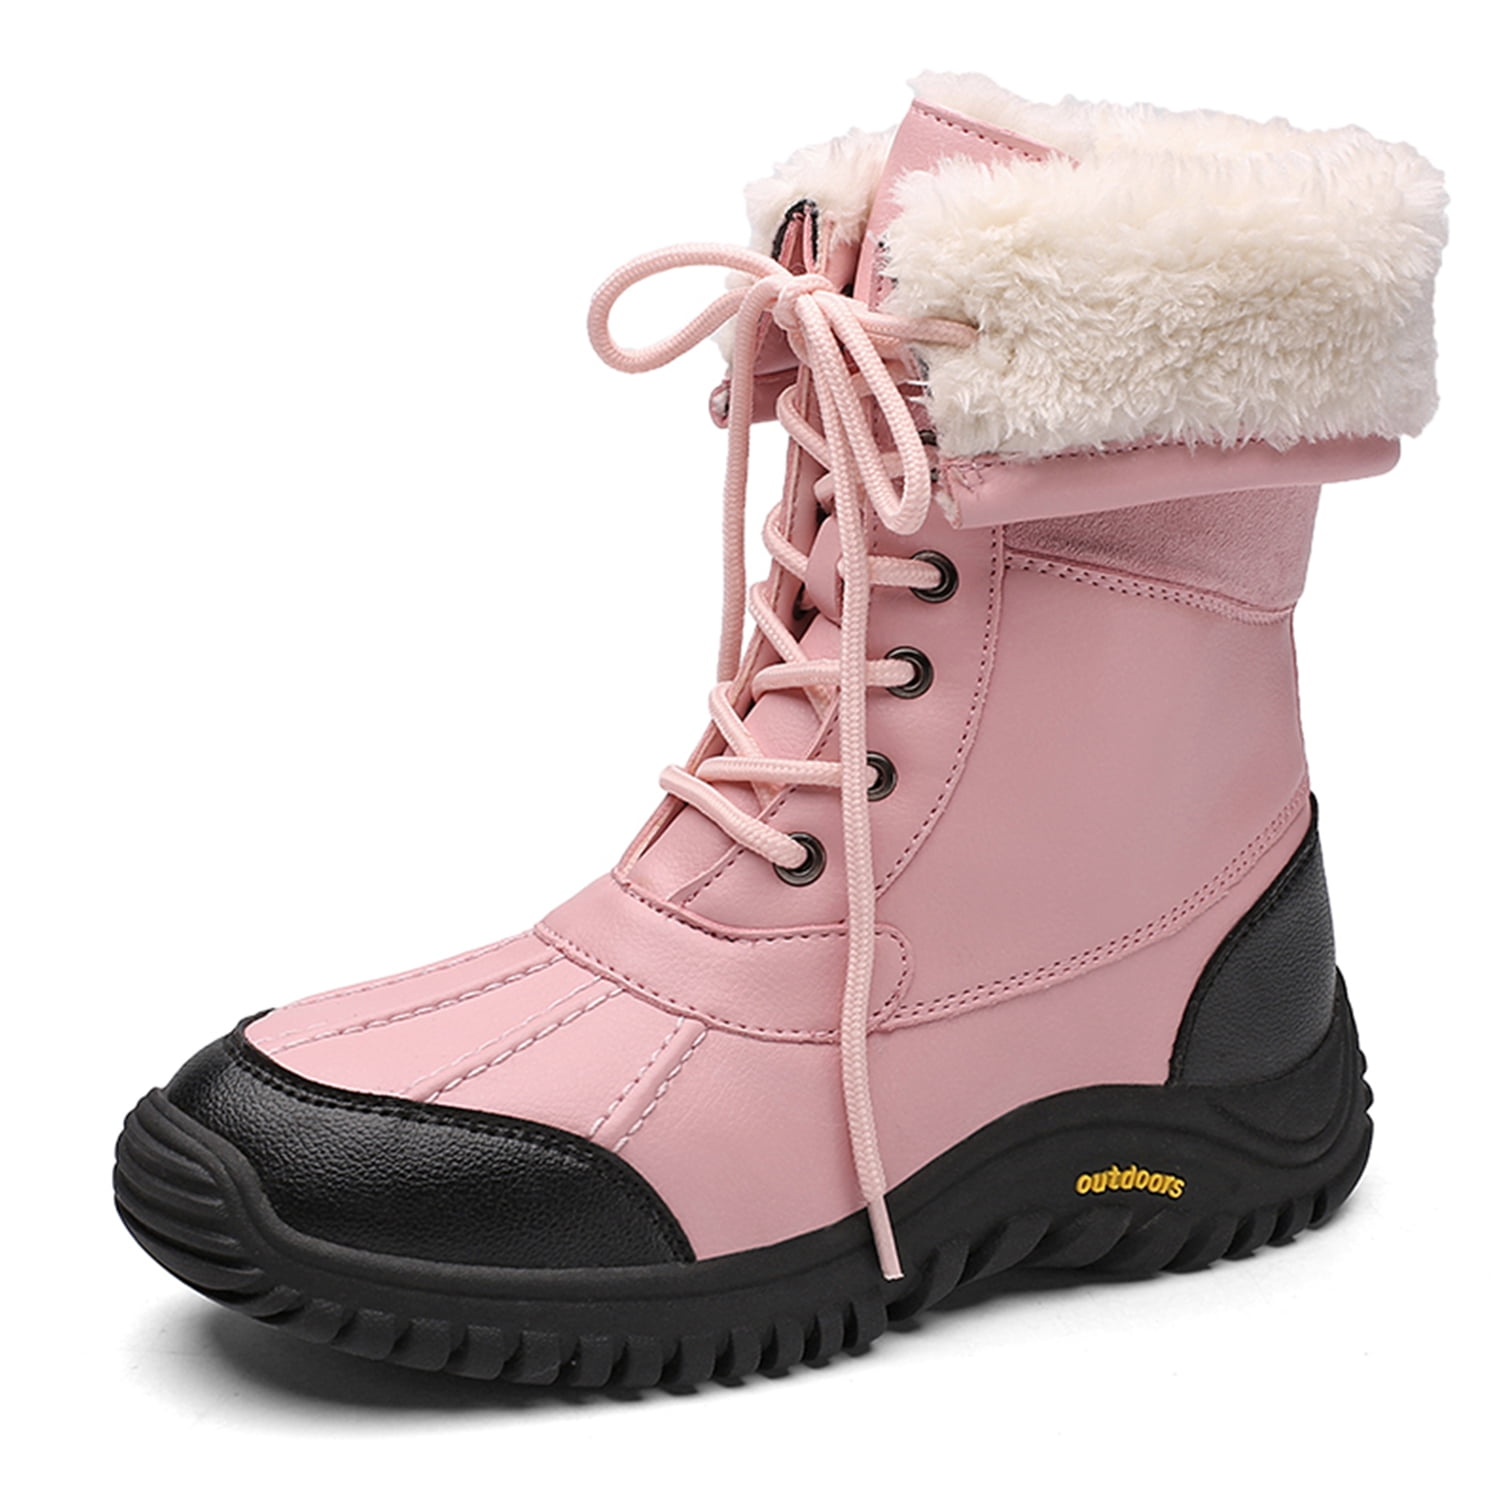 Hoxekle Woman Mid Calf Boots Lace Up Slip On Round Toe Mid Heel Faux Fur Winter Warm Ourdoor Sneaker Fashion Snow Boos